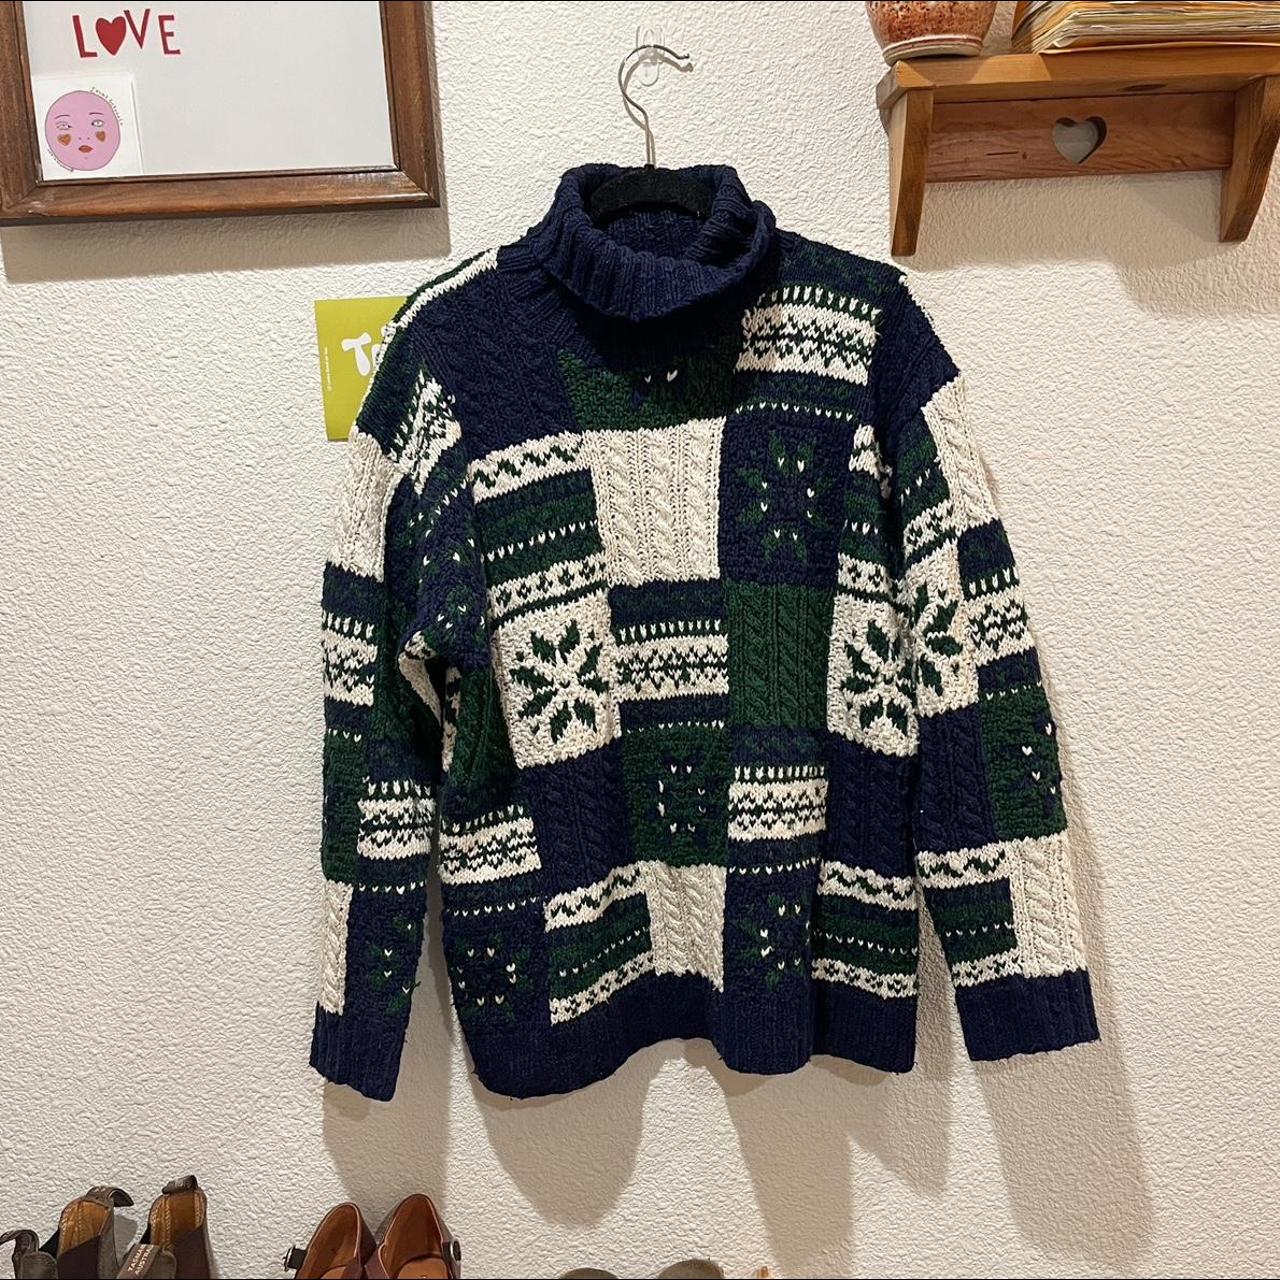 90s grandpa patchwork sweater!! Hand-knit and has... - Depop